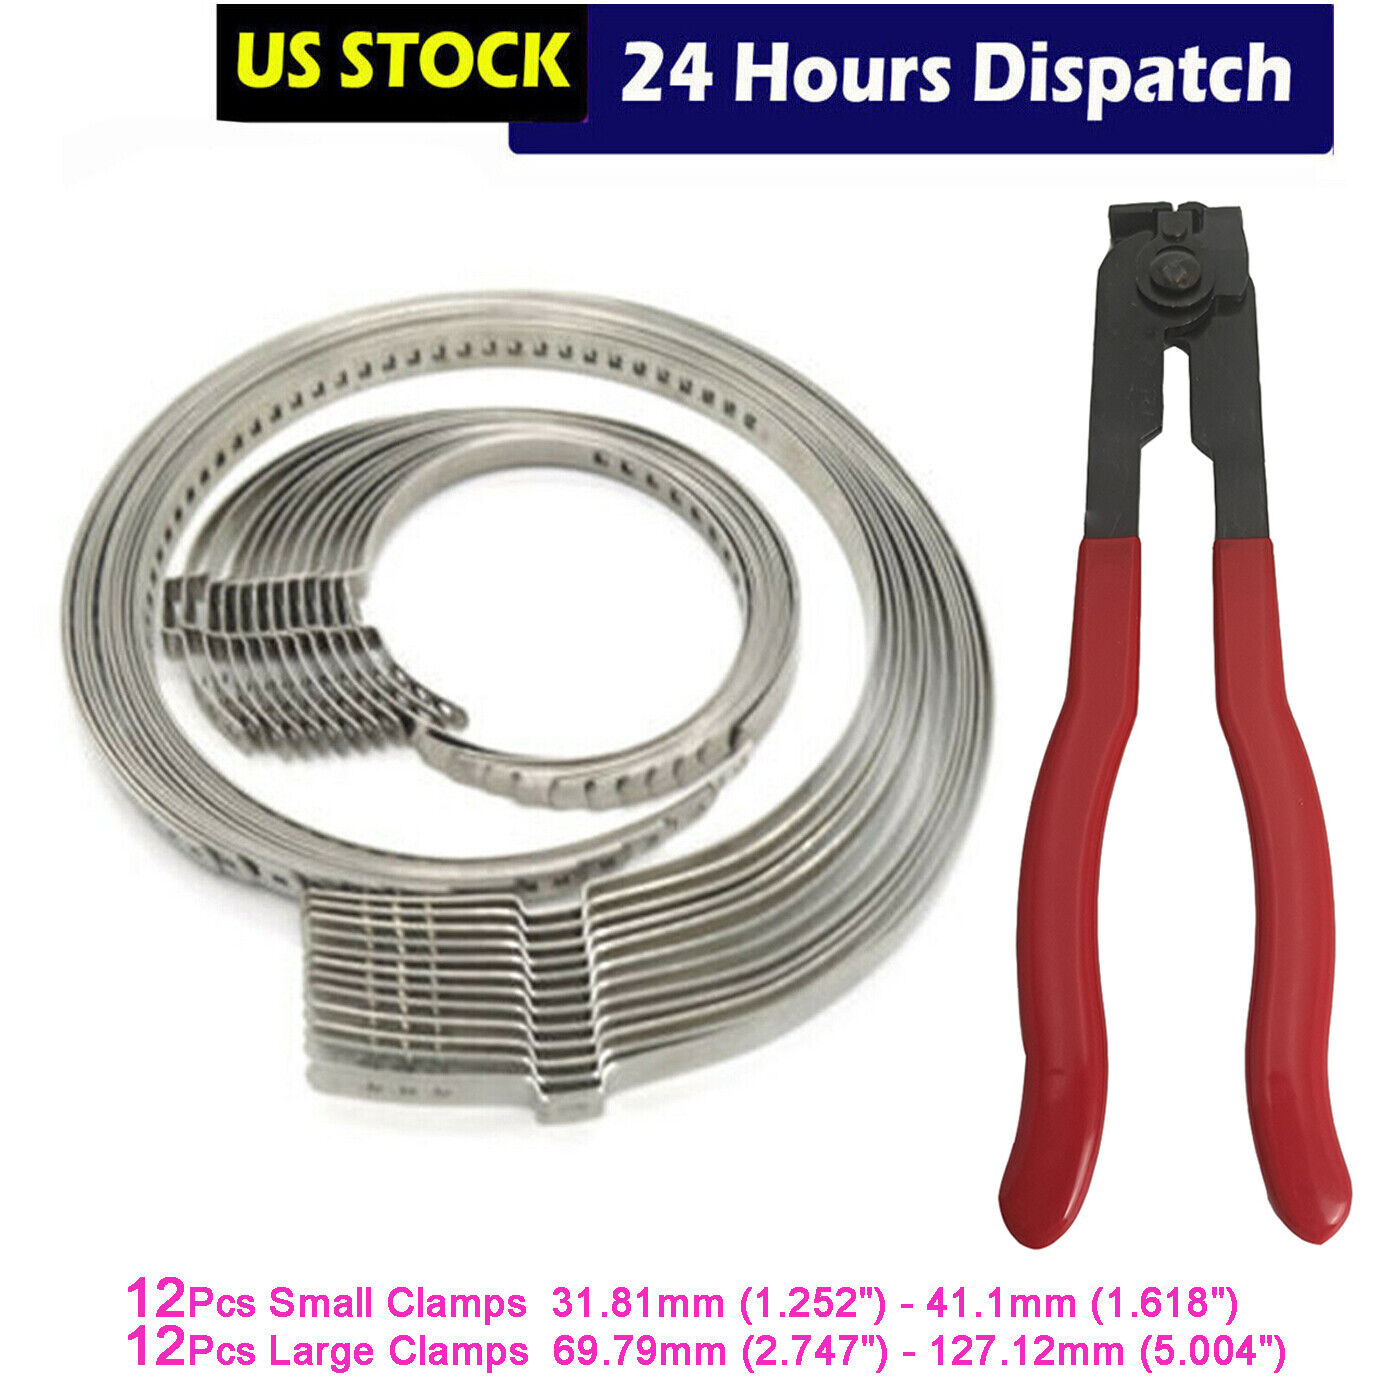 24 Pcs Universal Adjustable Axle CV Joint Boot Crimp Clamps W/ Clamp Pliers Tool